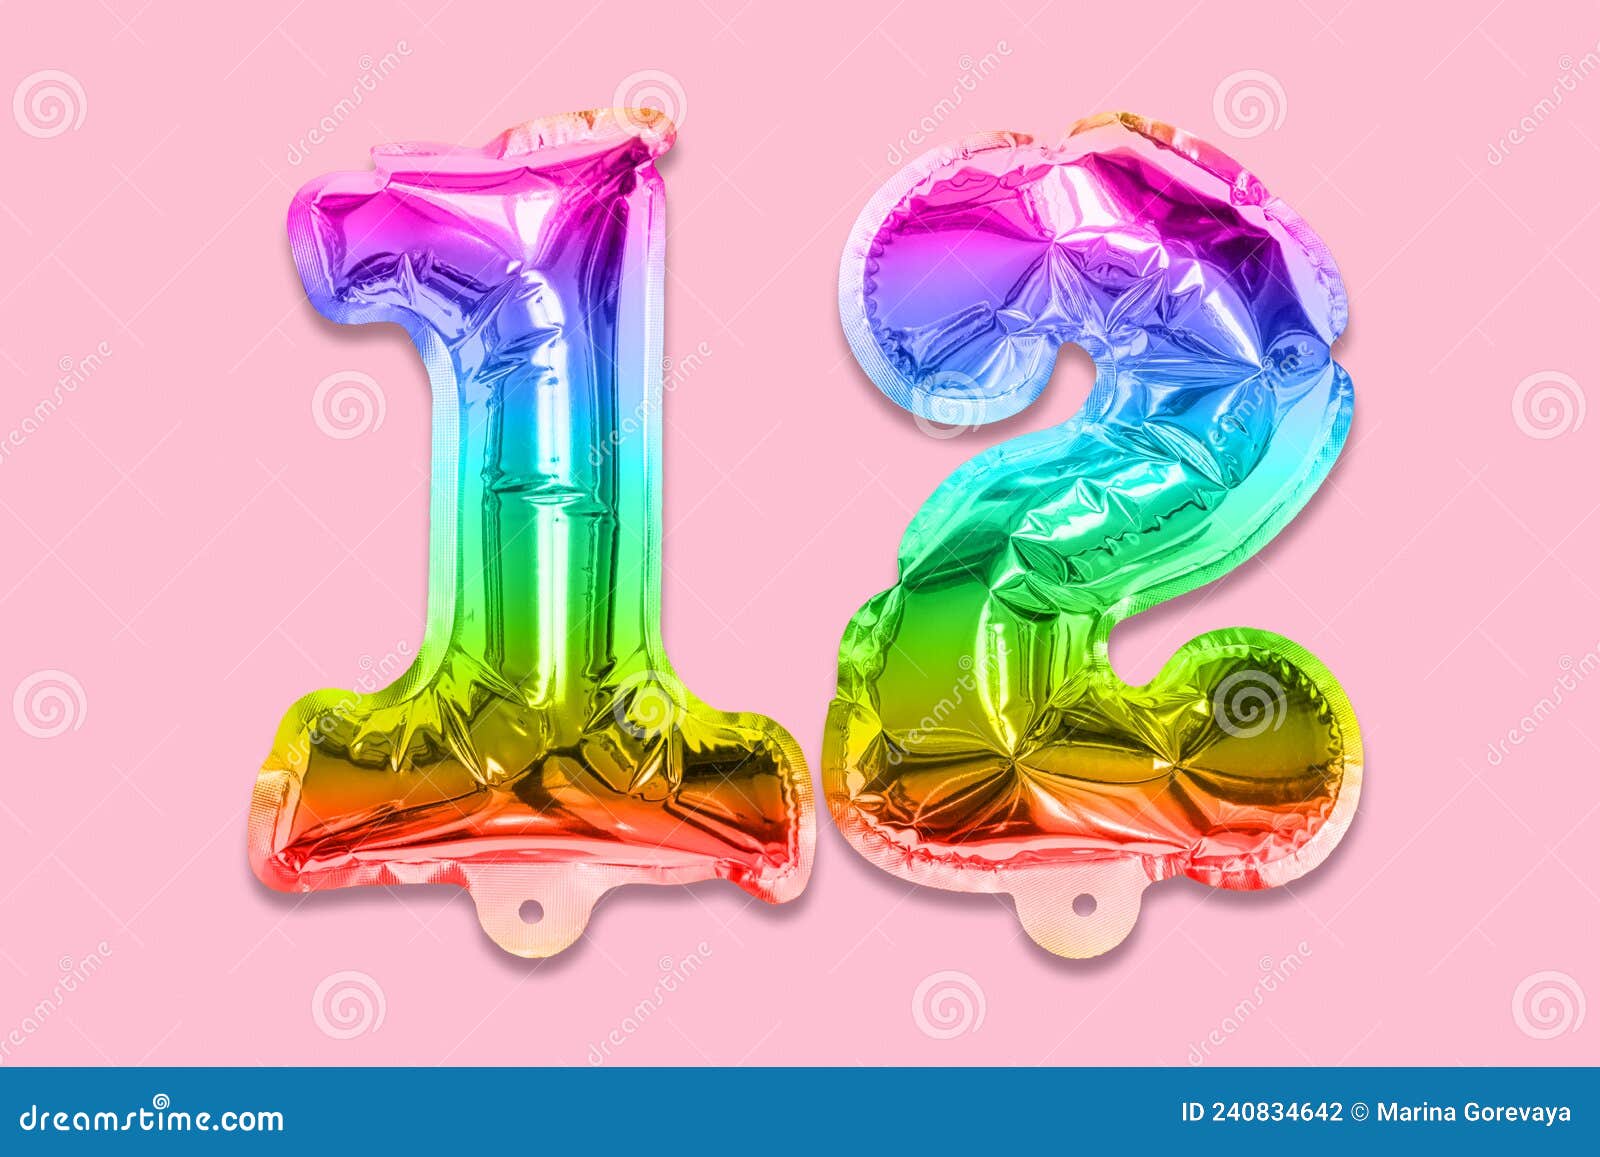 https://thumbs.dreamstime.com/z/rainbow-foil-balloon-number-digit-twelve-pink-background-birthday-greeting-card-inscription-top-view-numerical-240834642.jpg